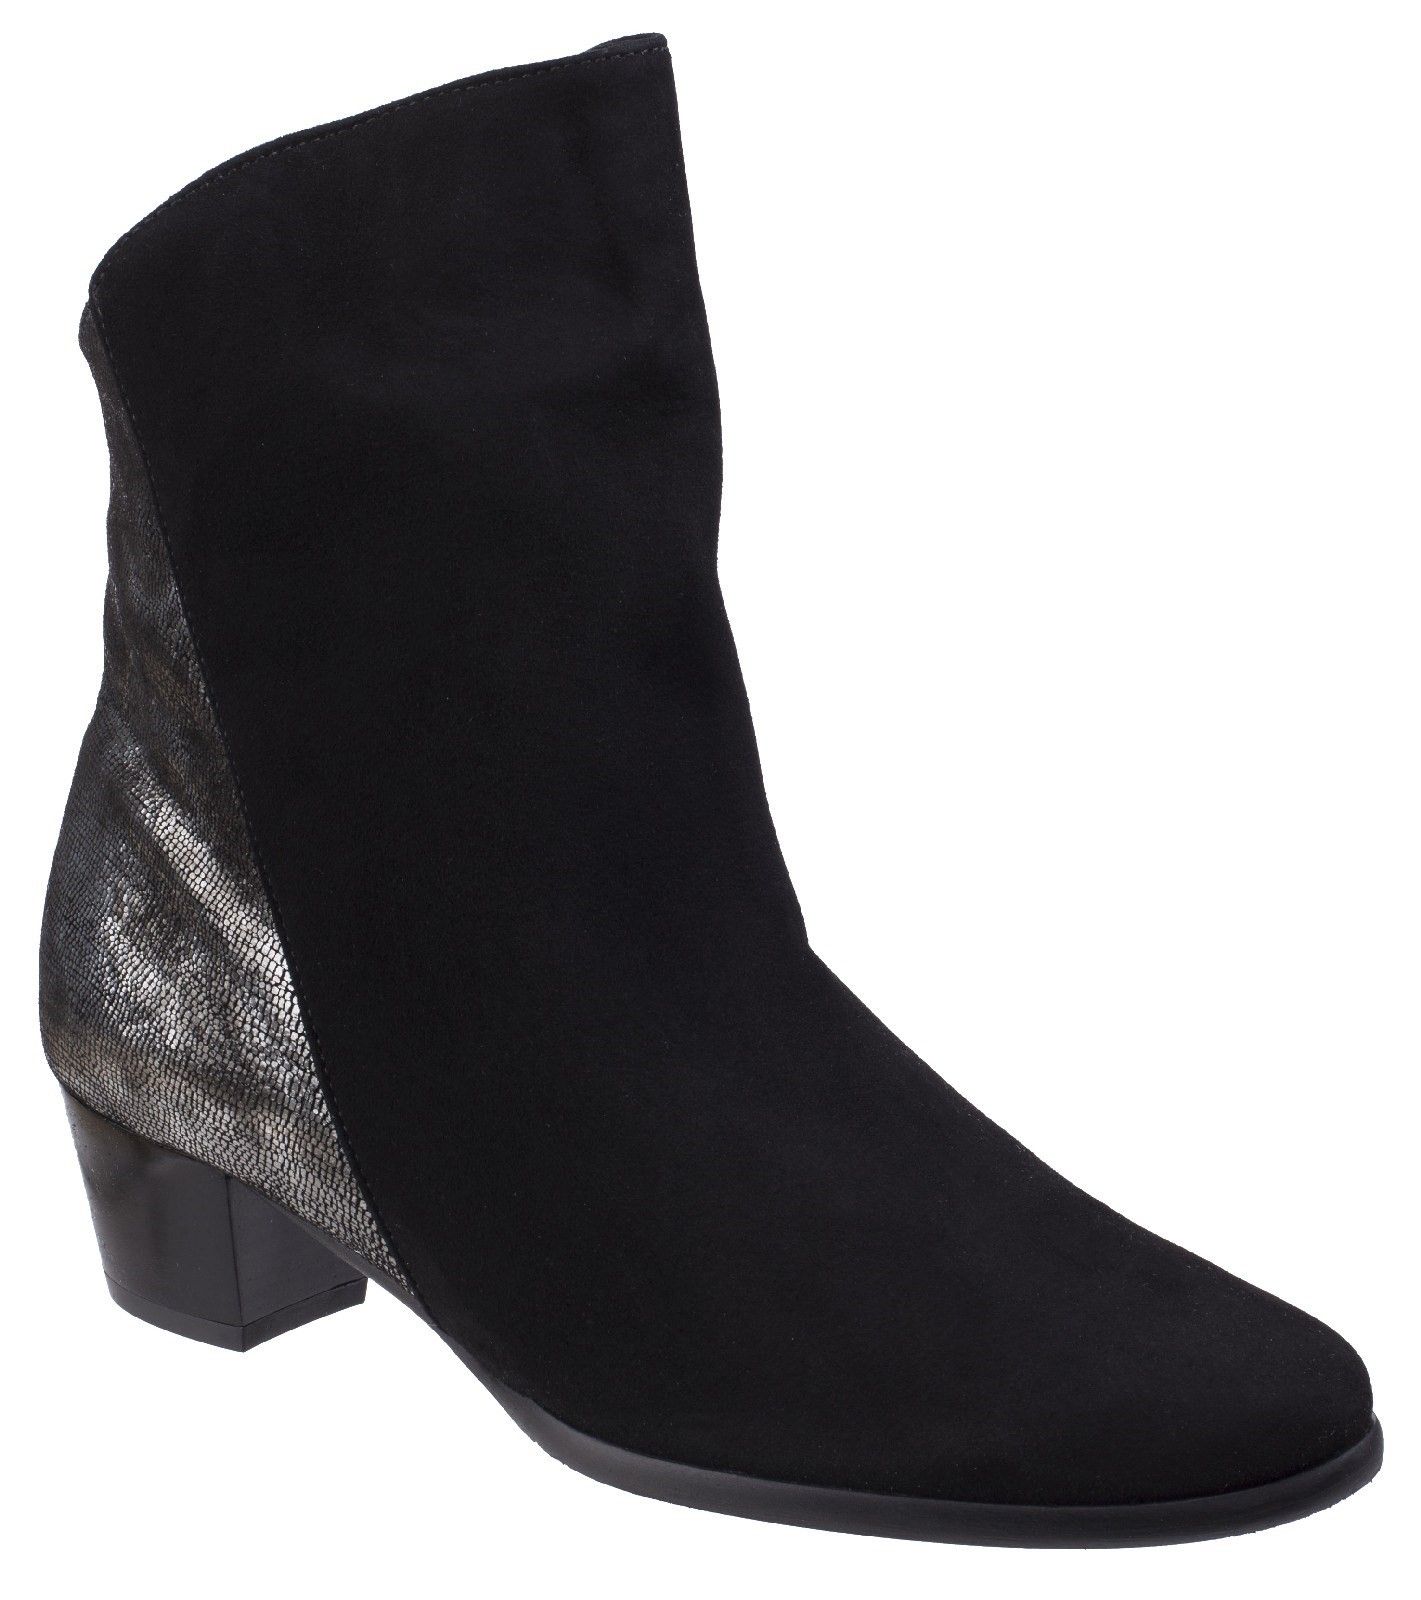 Riva brings in a twist with this eye-catching evening boot.  A half shimmering metallic reptile print gives an elegant edge to a traditional classic suede boot. Crafted with a luxury leather upper. 
Flexible and soft supple suede vamp. 
Shimmering metallic reptile print back and cuff lip. 
Versatile styling with optional fold over cuff and snap button fastening. 
Full side zip opening.